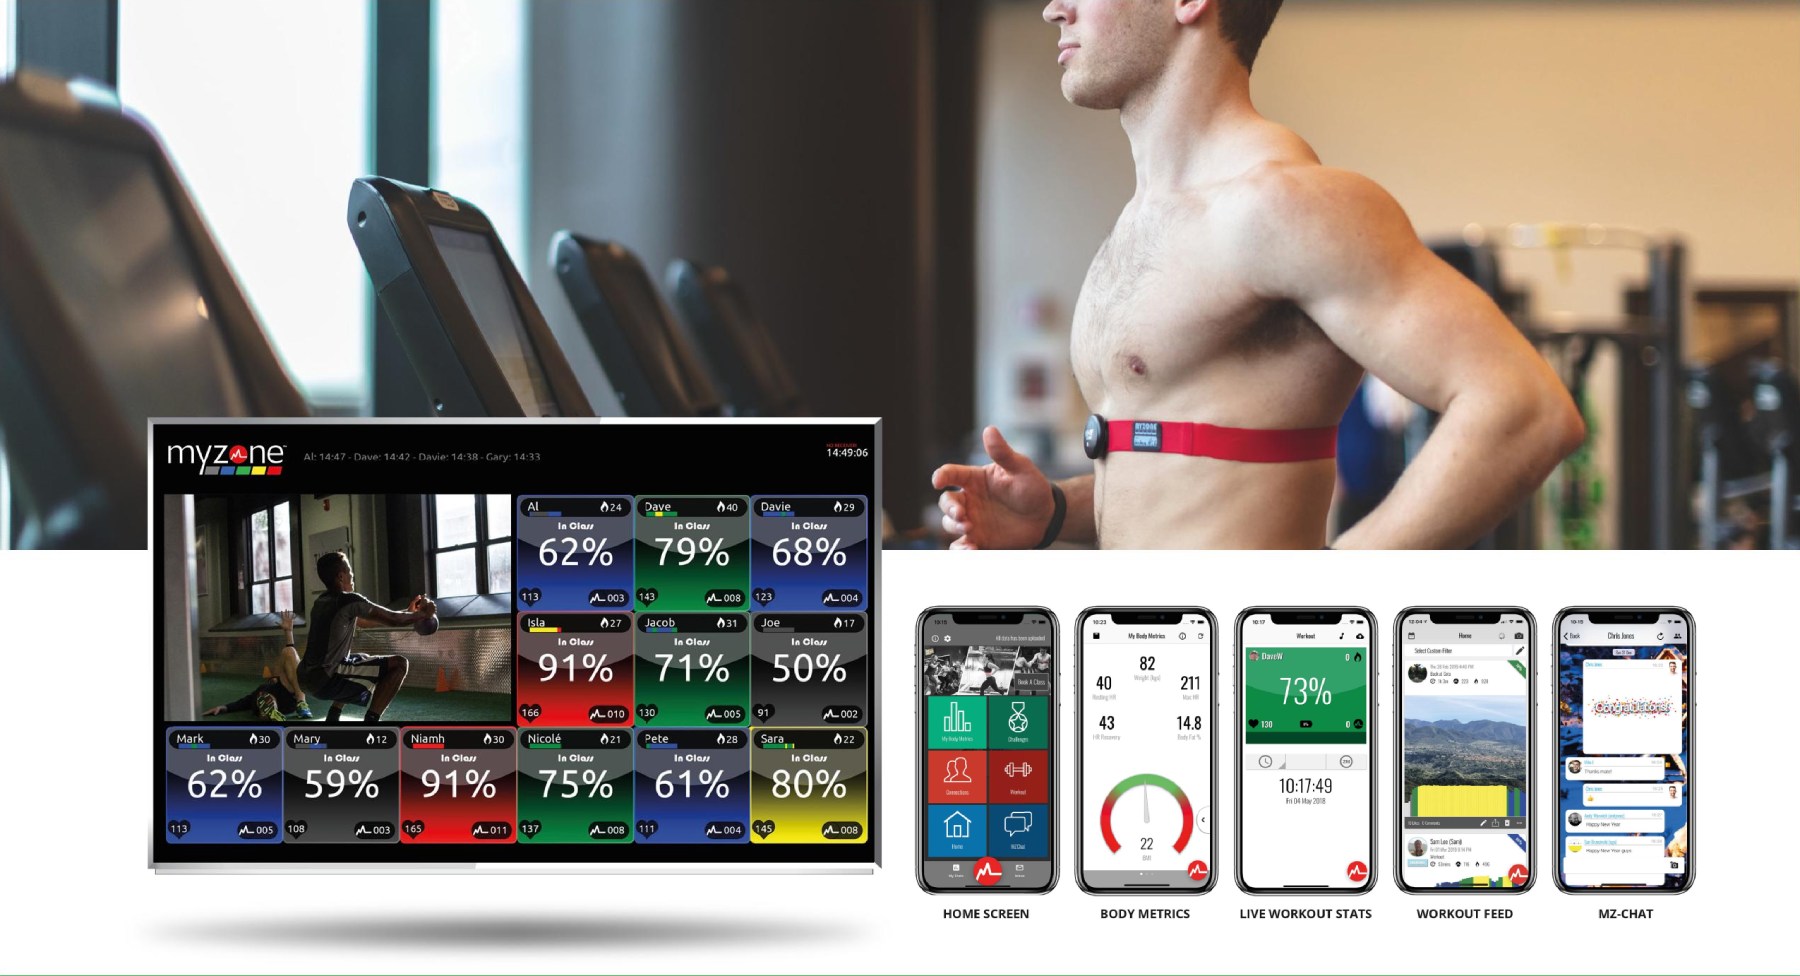 Make Myzone part of your next workout